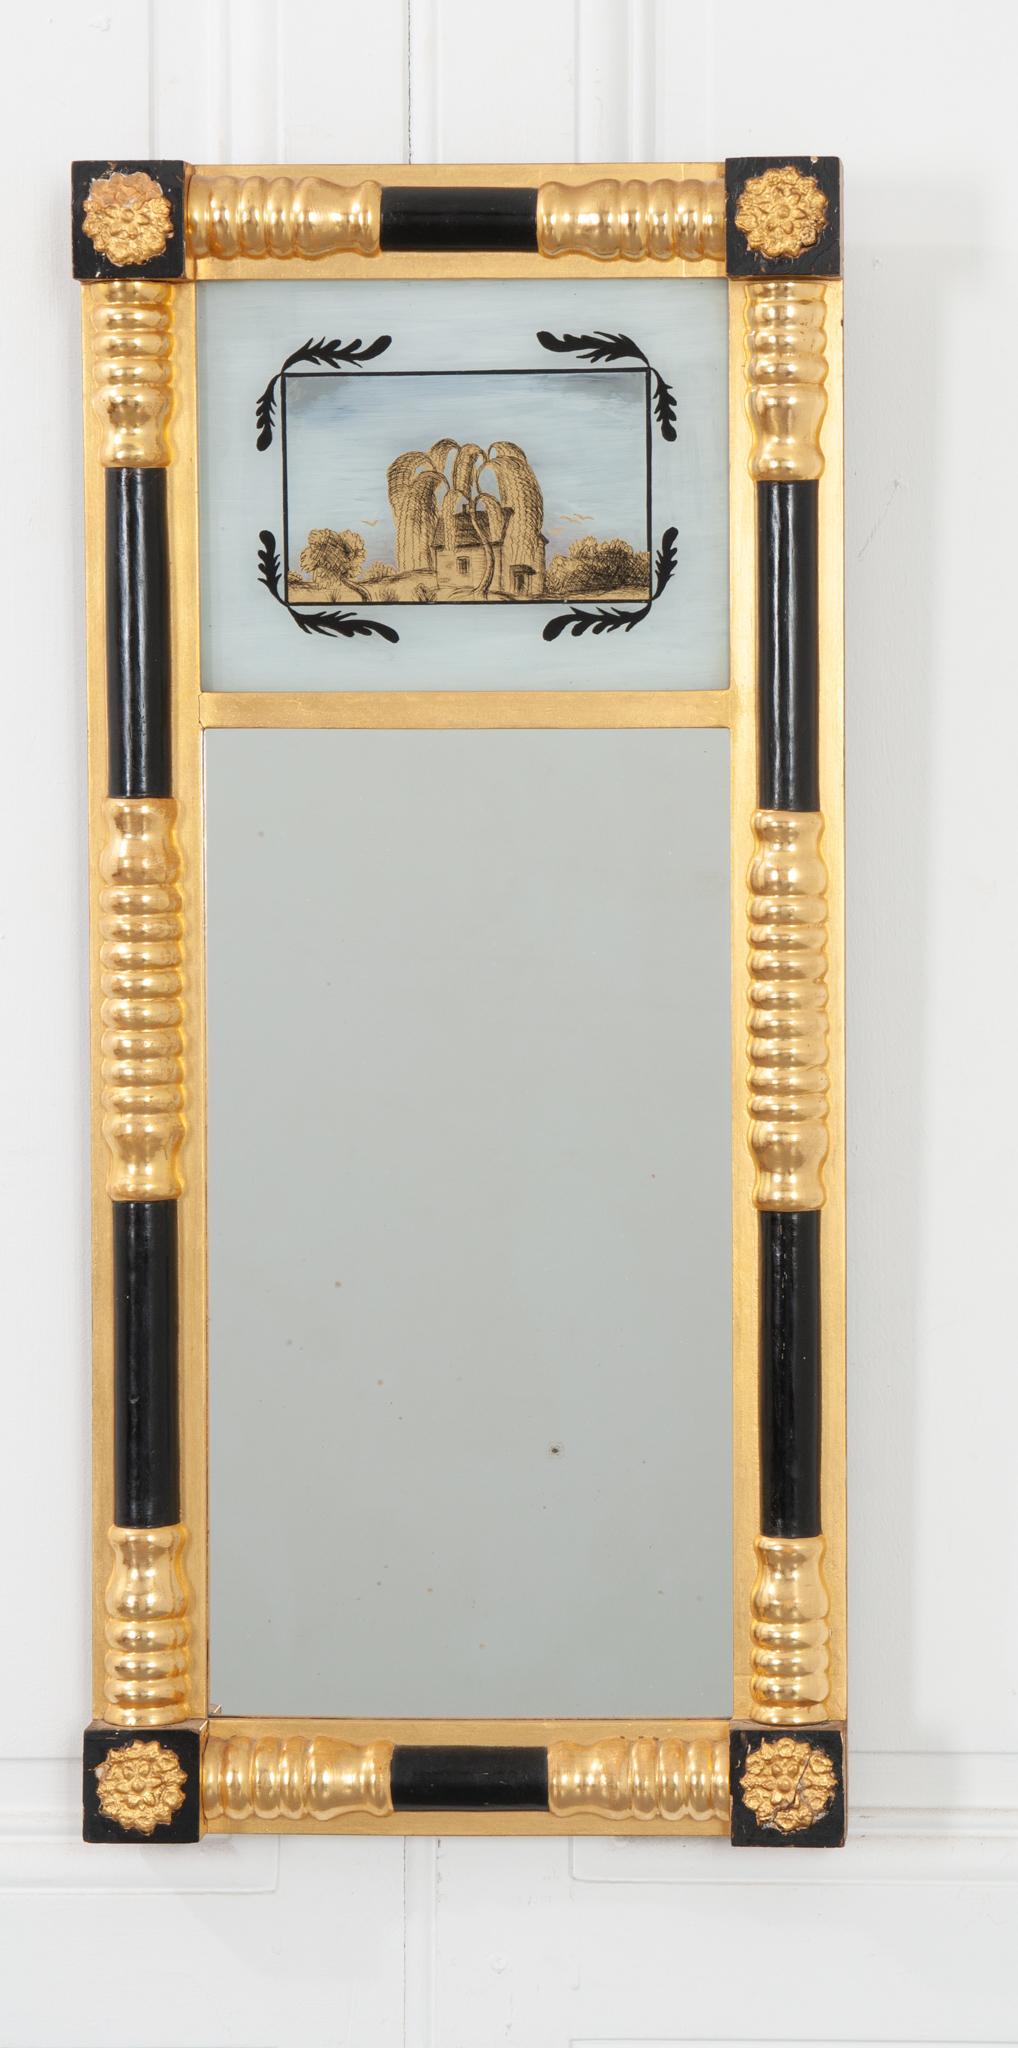 This fabulous Swedish mirror is dripping in detail, circa 1870. Eglomise mirrors have been painted on the reverse side to reveal an image from behind the glass. This one depicts a peaceful scene of a country house with a large tree shading it